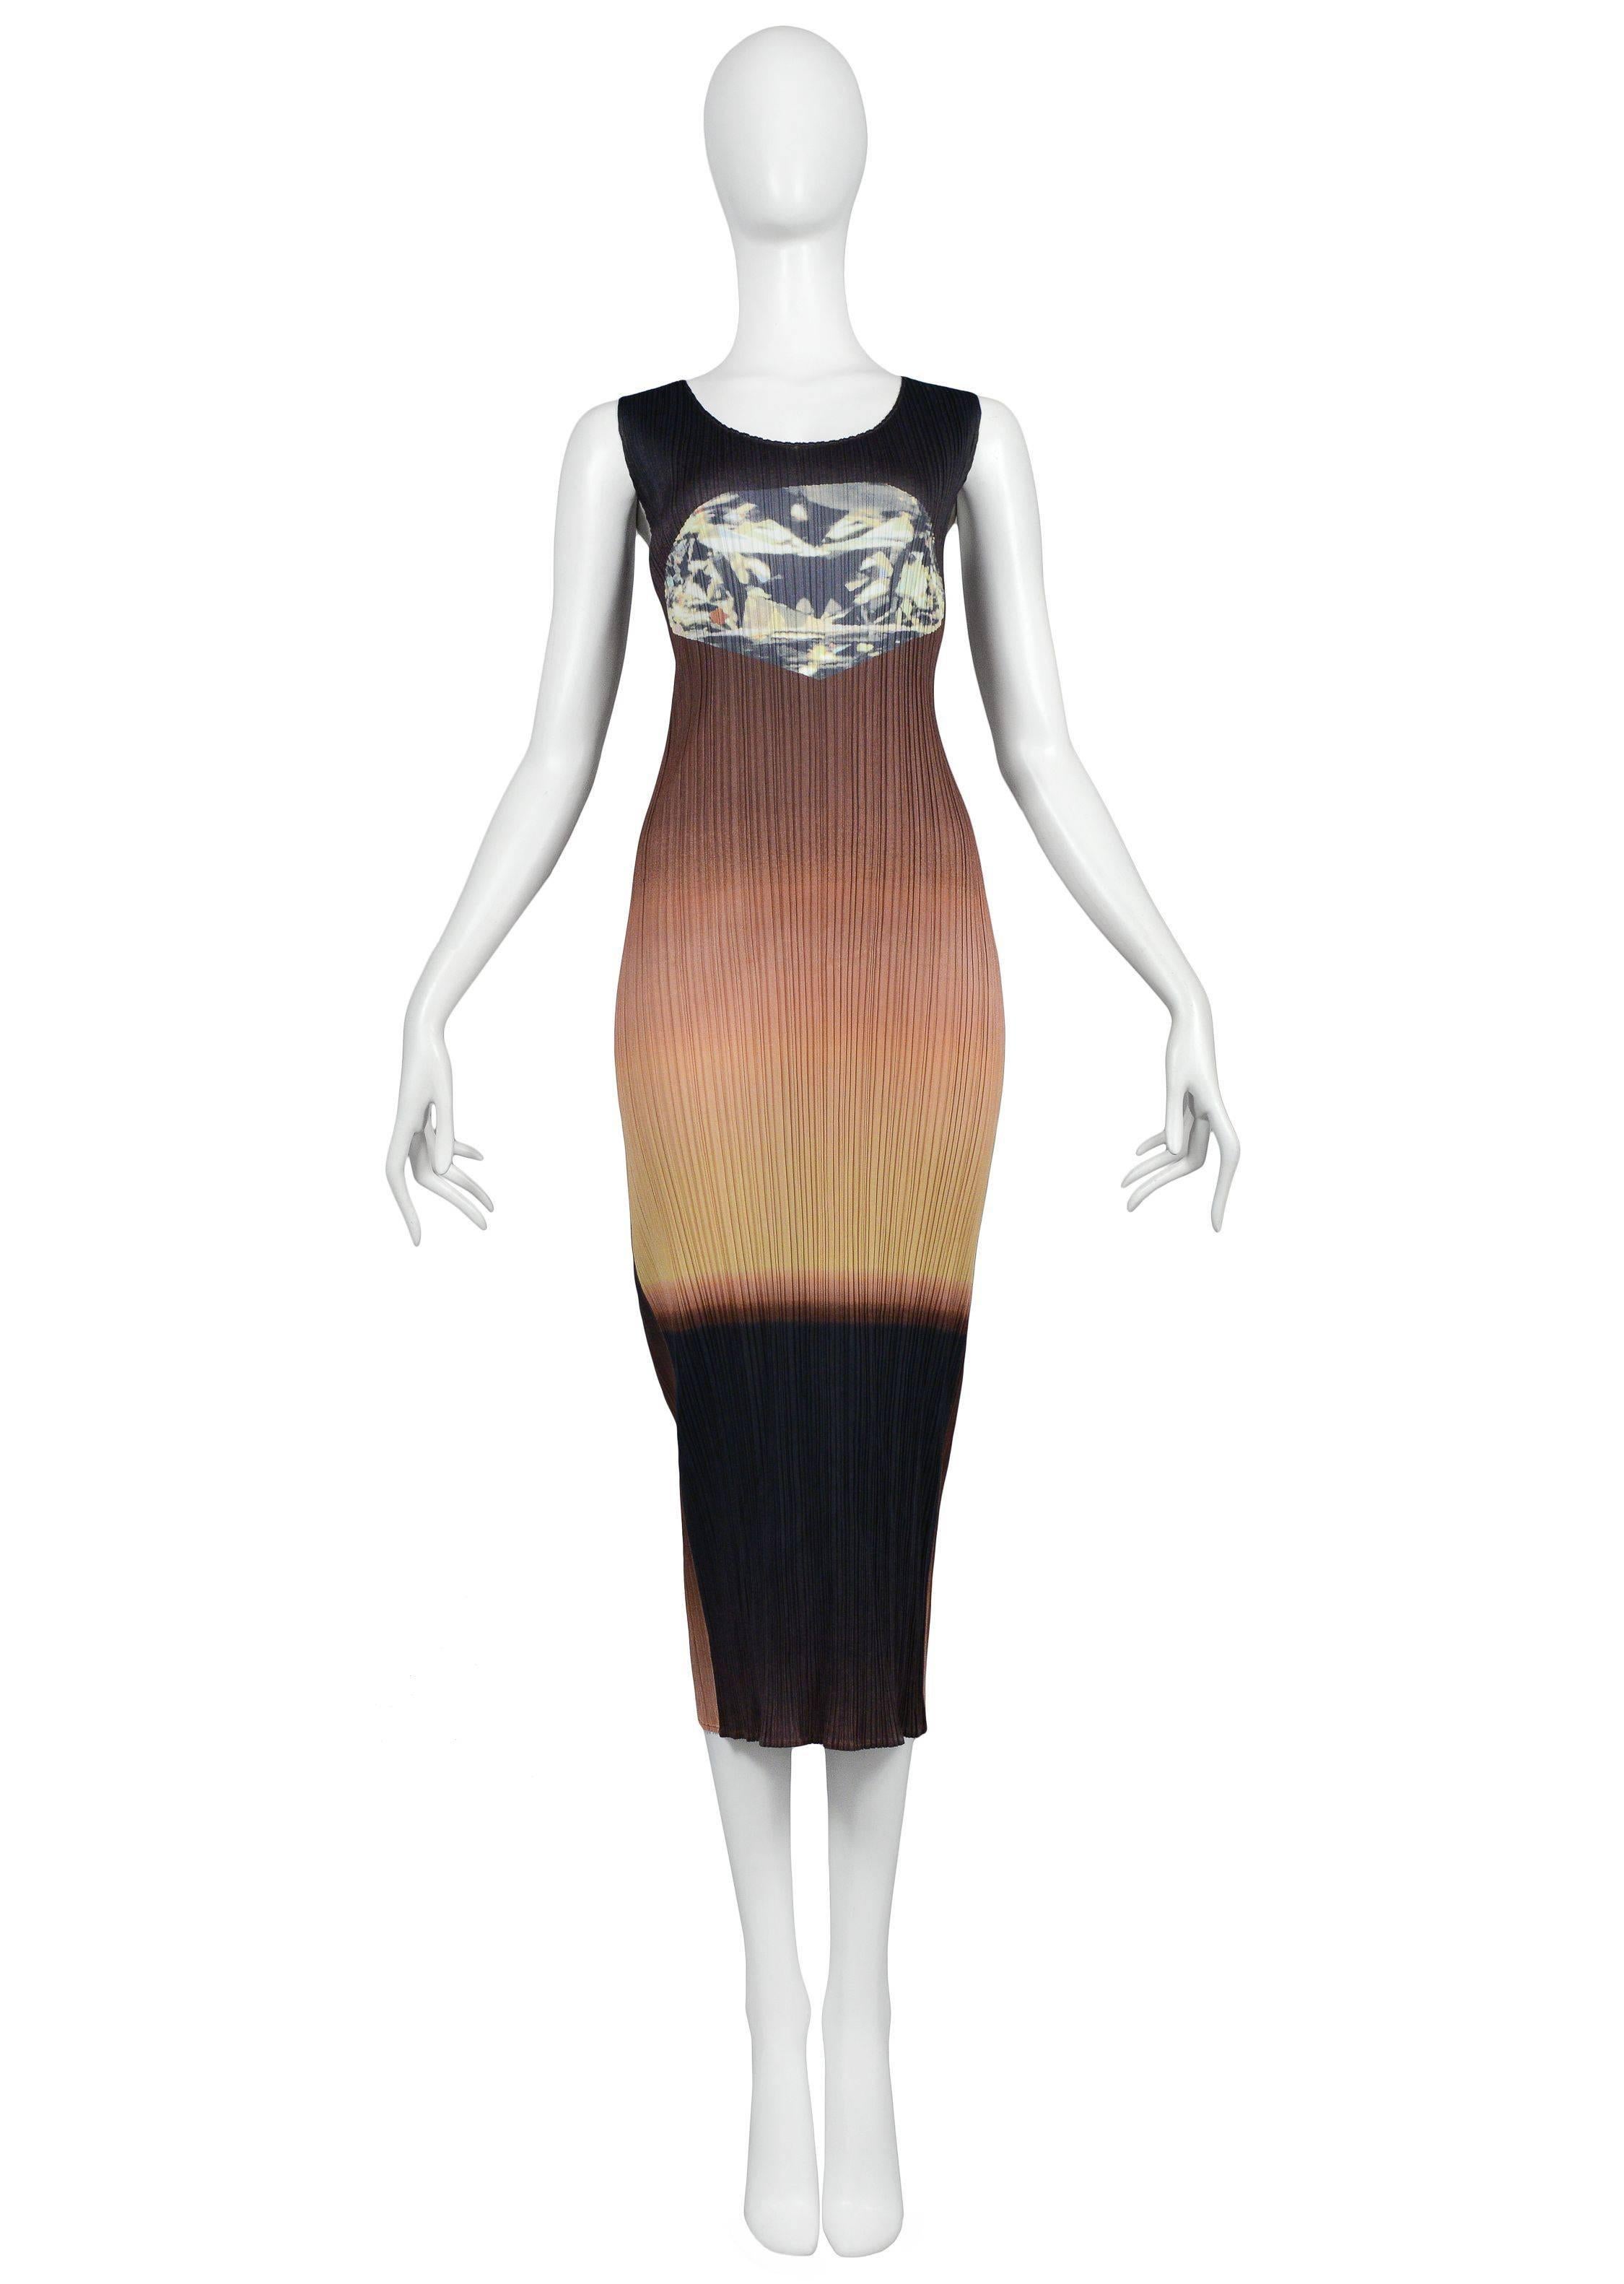 Vintage Issey Miyake brown pleated ombre dress with diamond print at chest. From the Pleats Please Collection.